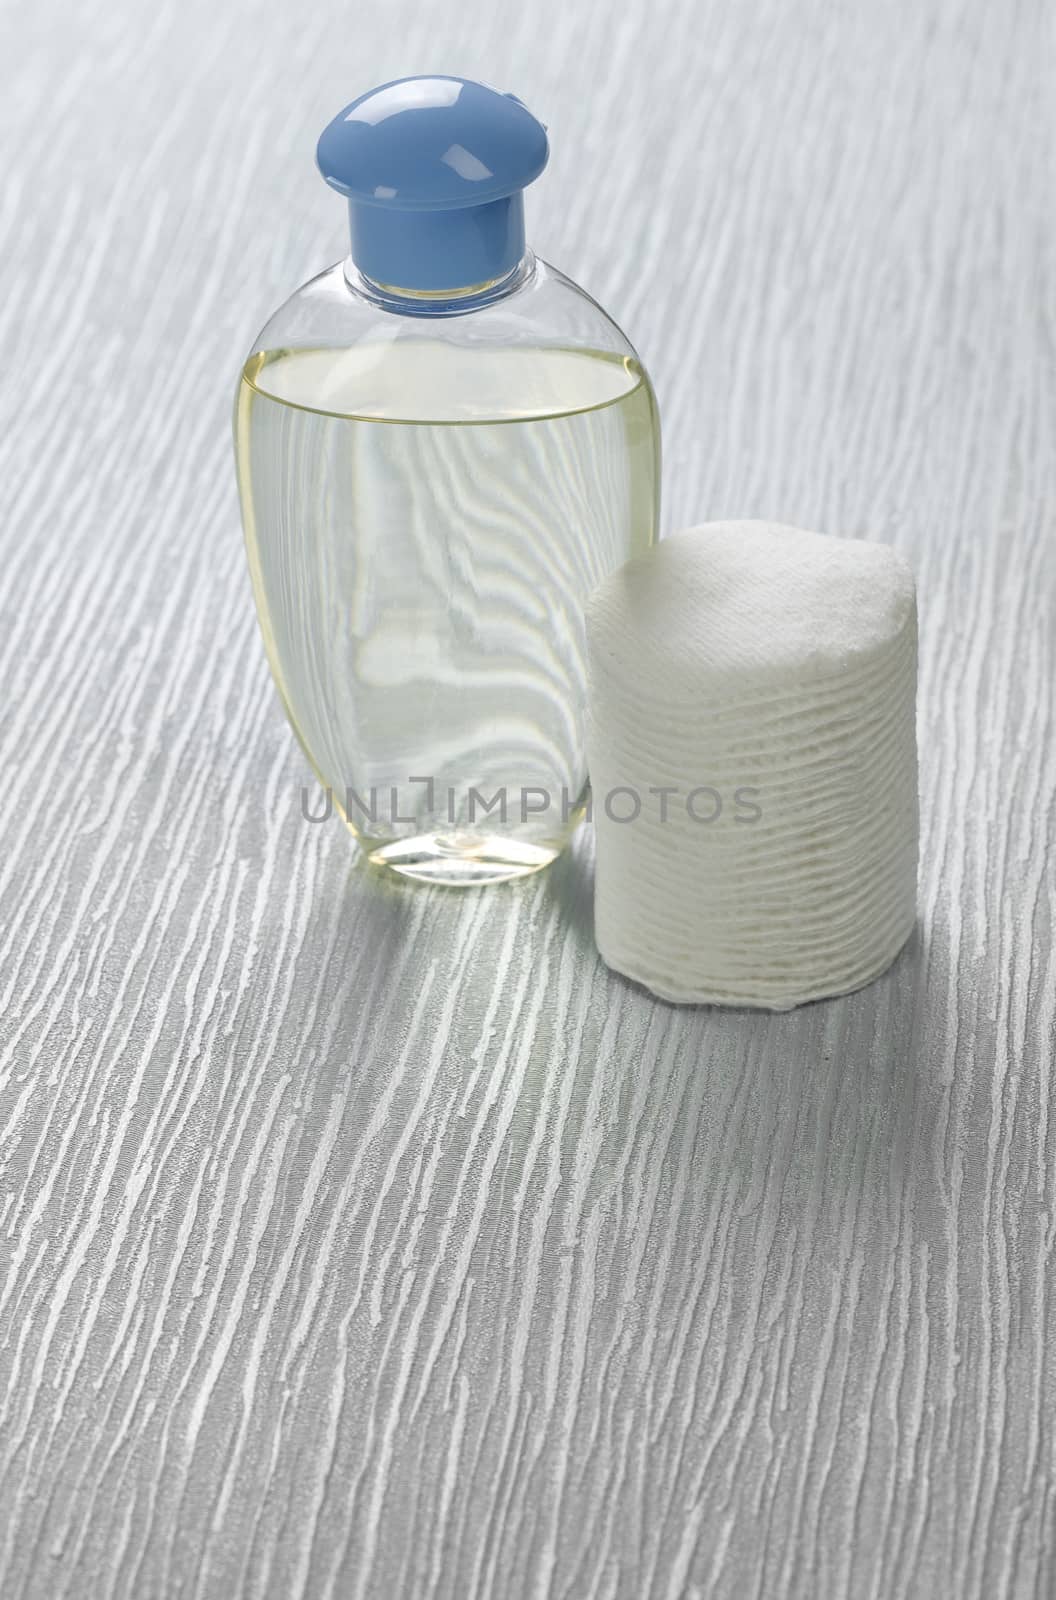 Bottle and cotton pads